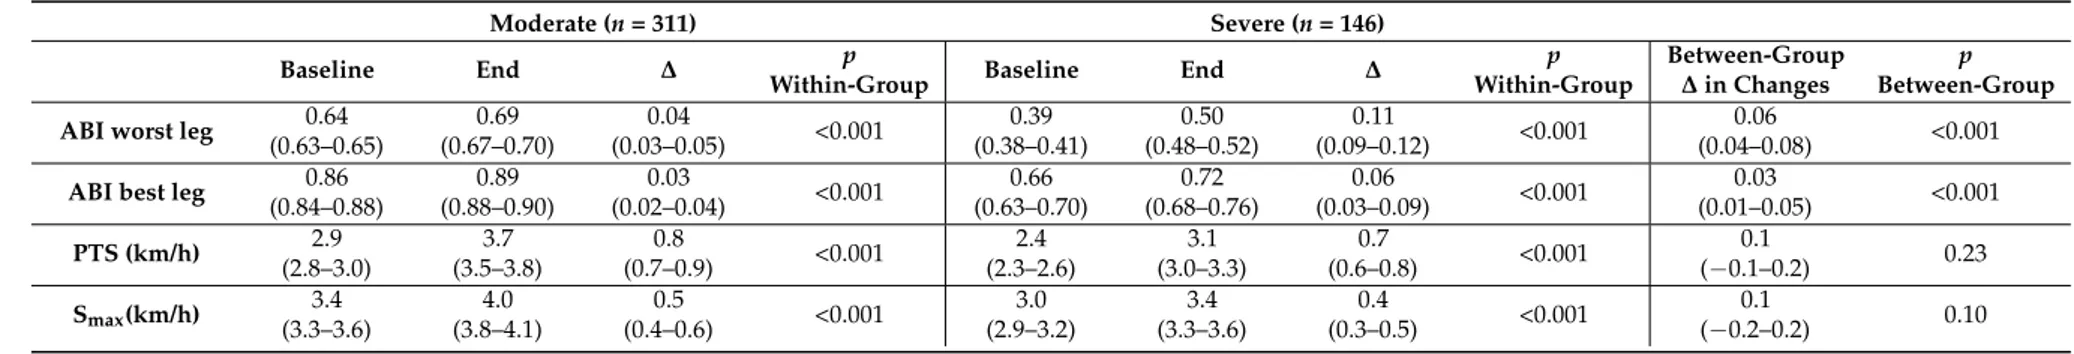 Table 2. Within- and between-group differences in rehabilitation outcomes.